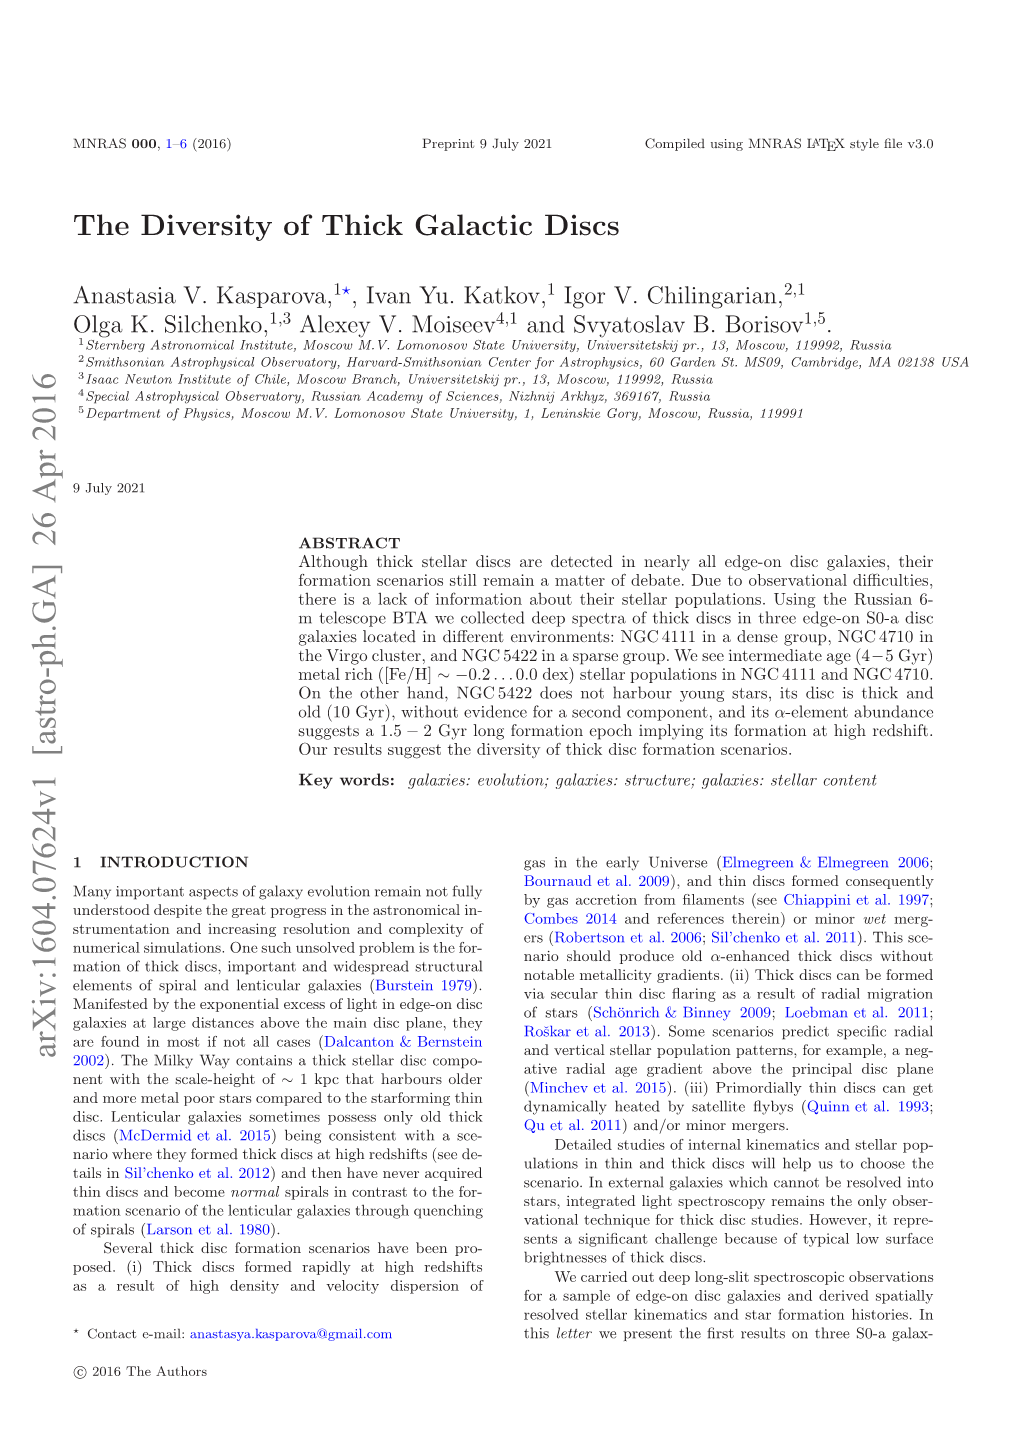 The Diversity of Thick Galactic Discs